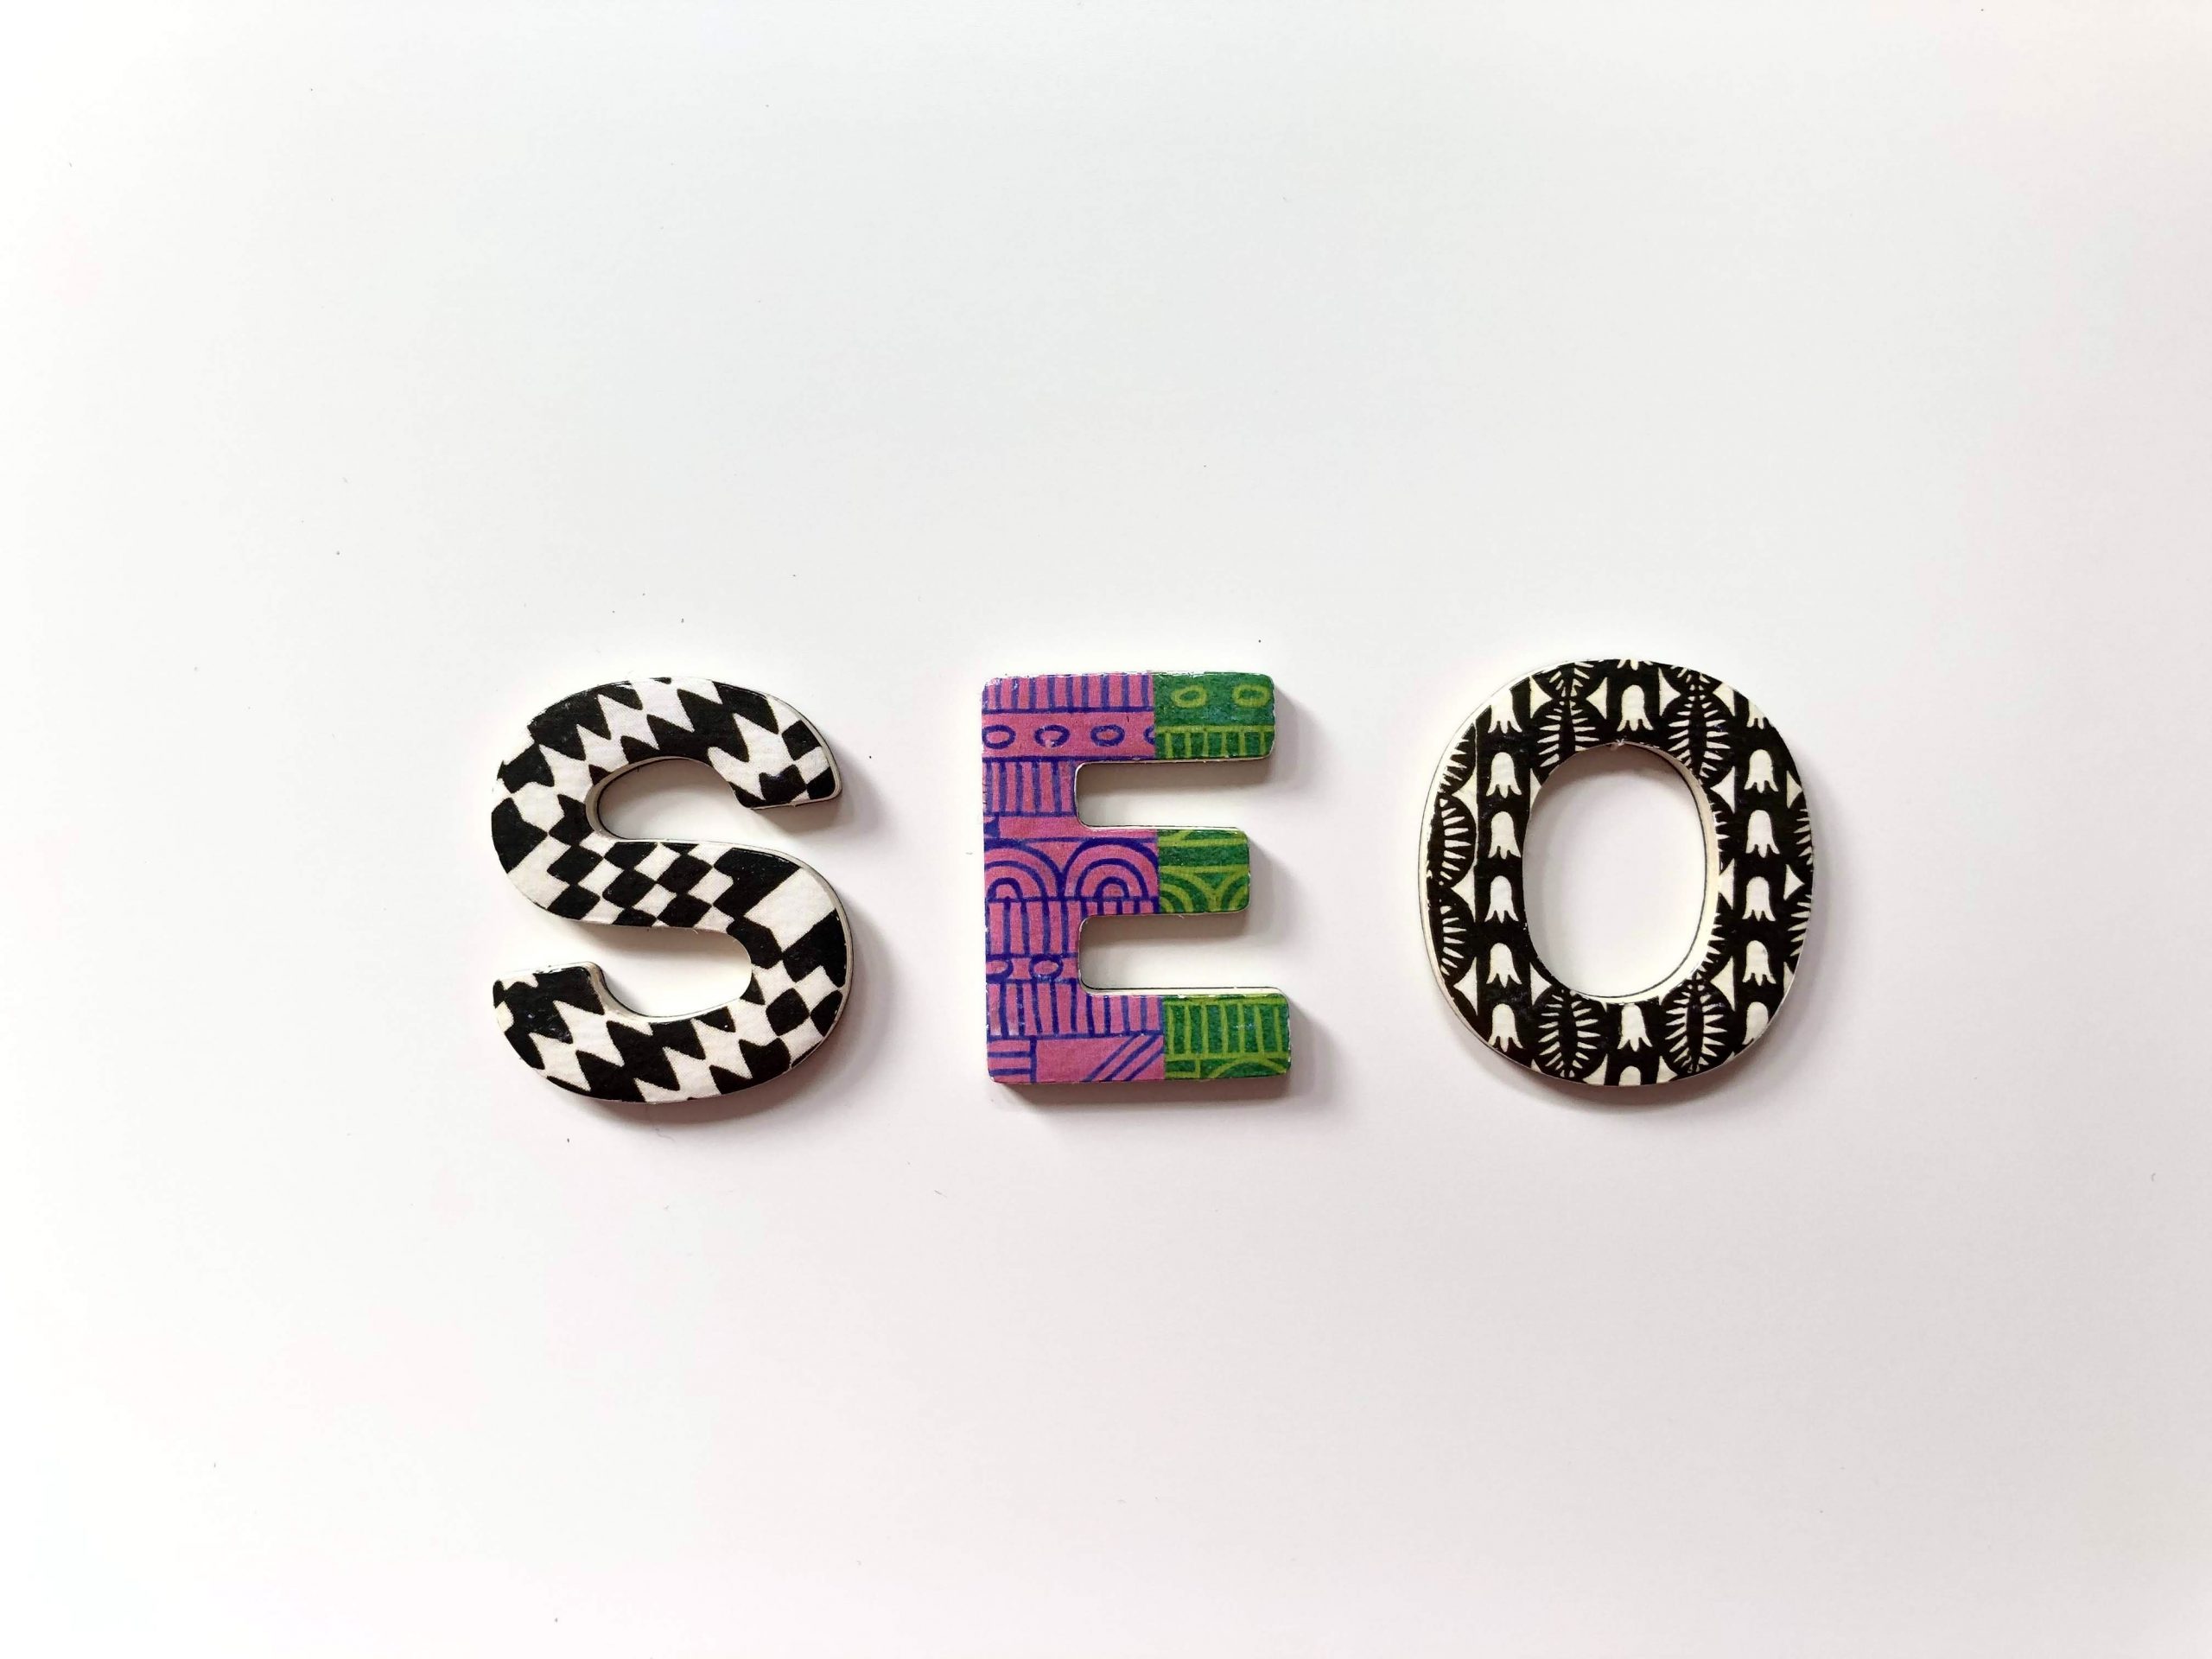 What Is Seo And Why Must I Care?